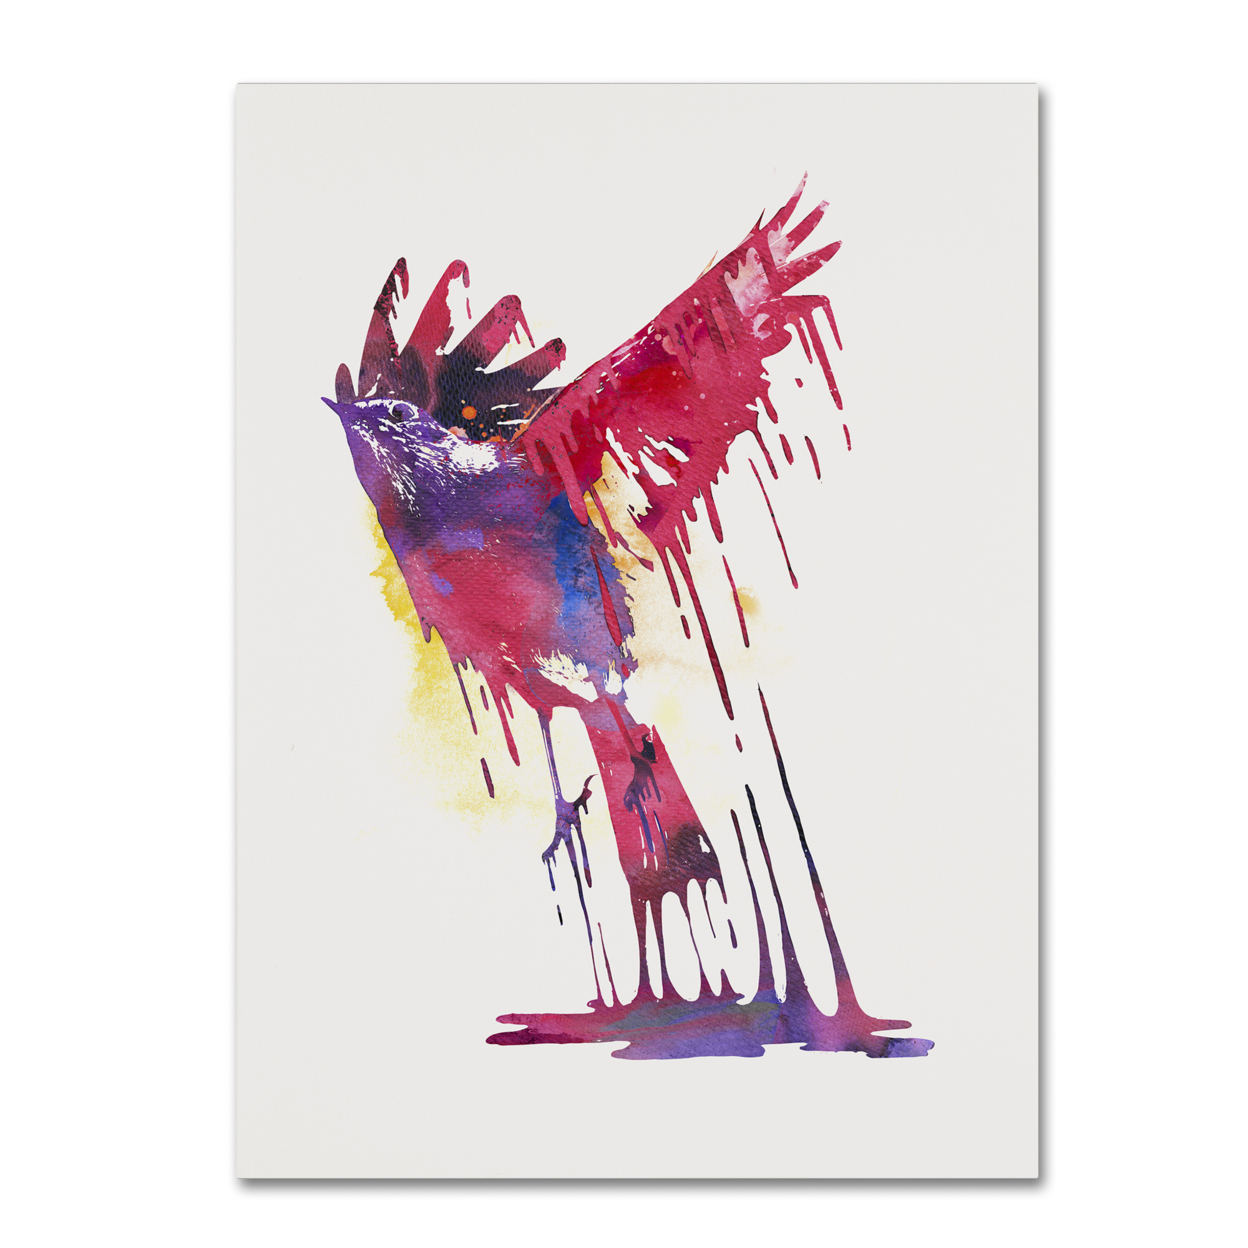 Robert Farkas 'The Great Emerge' Canvas Wall Art 35 X 47 Inches